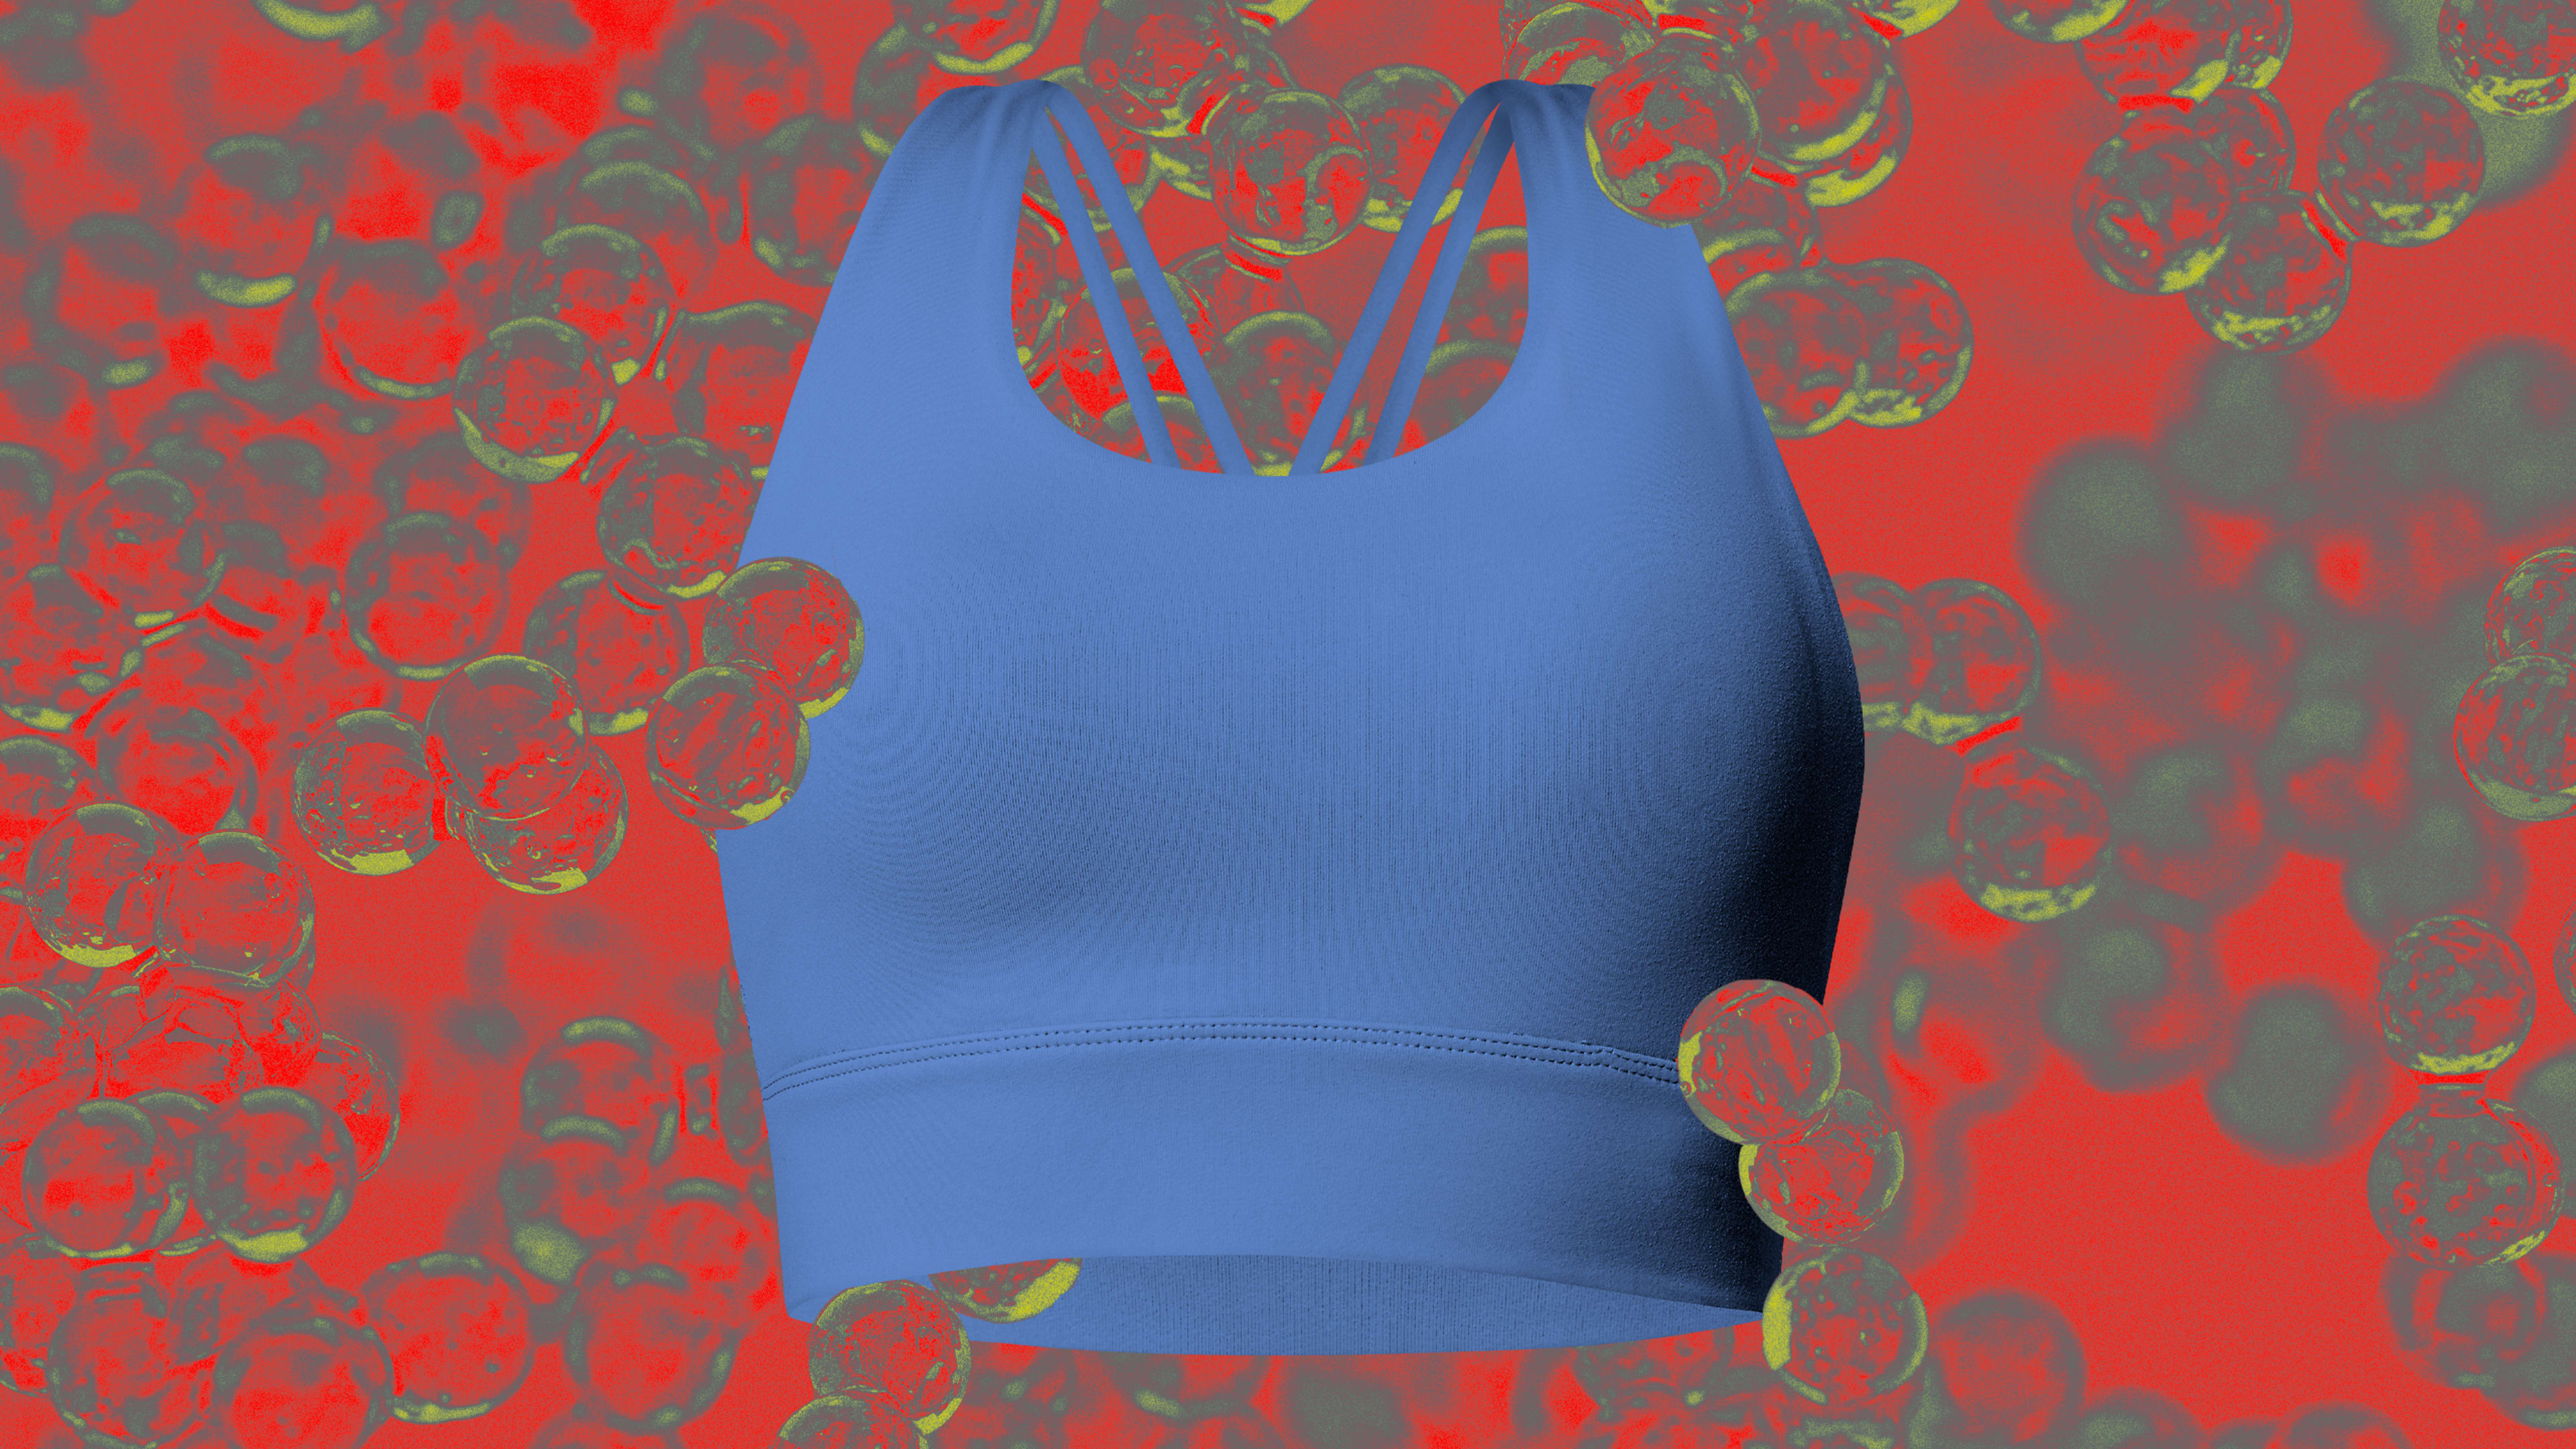 Report: Some sports bras and athletic wear may contain high levels of a toxic chemical